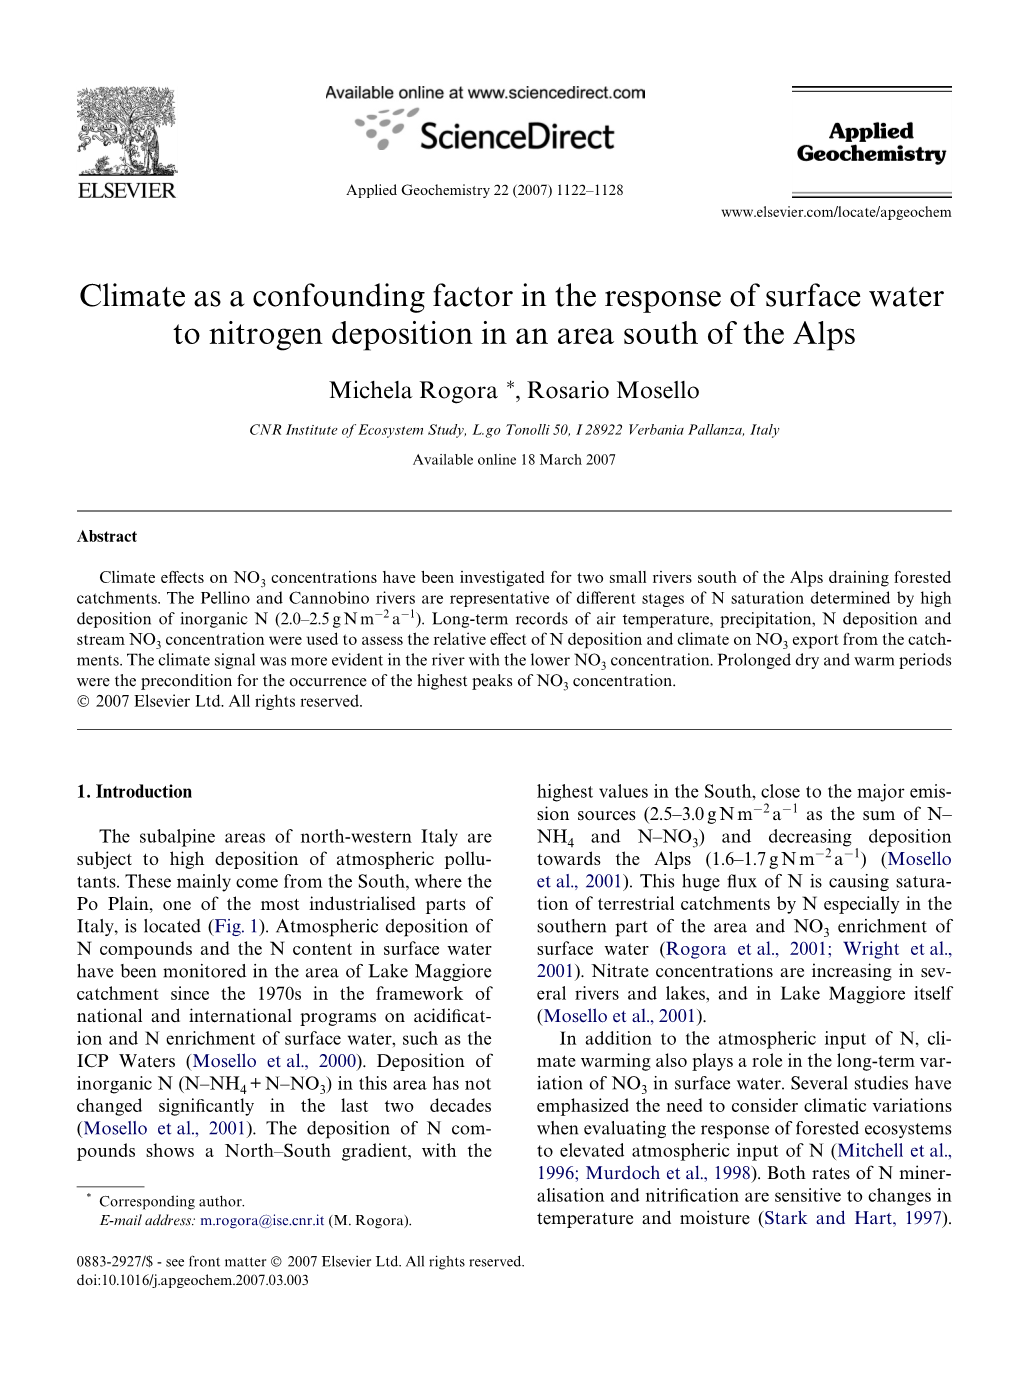 Climate As a Confounding Factor in the Response of Surface Water to Nitrogen Deposition in an Area South of the Alps